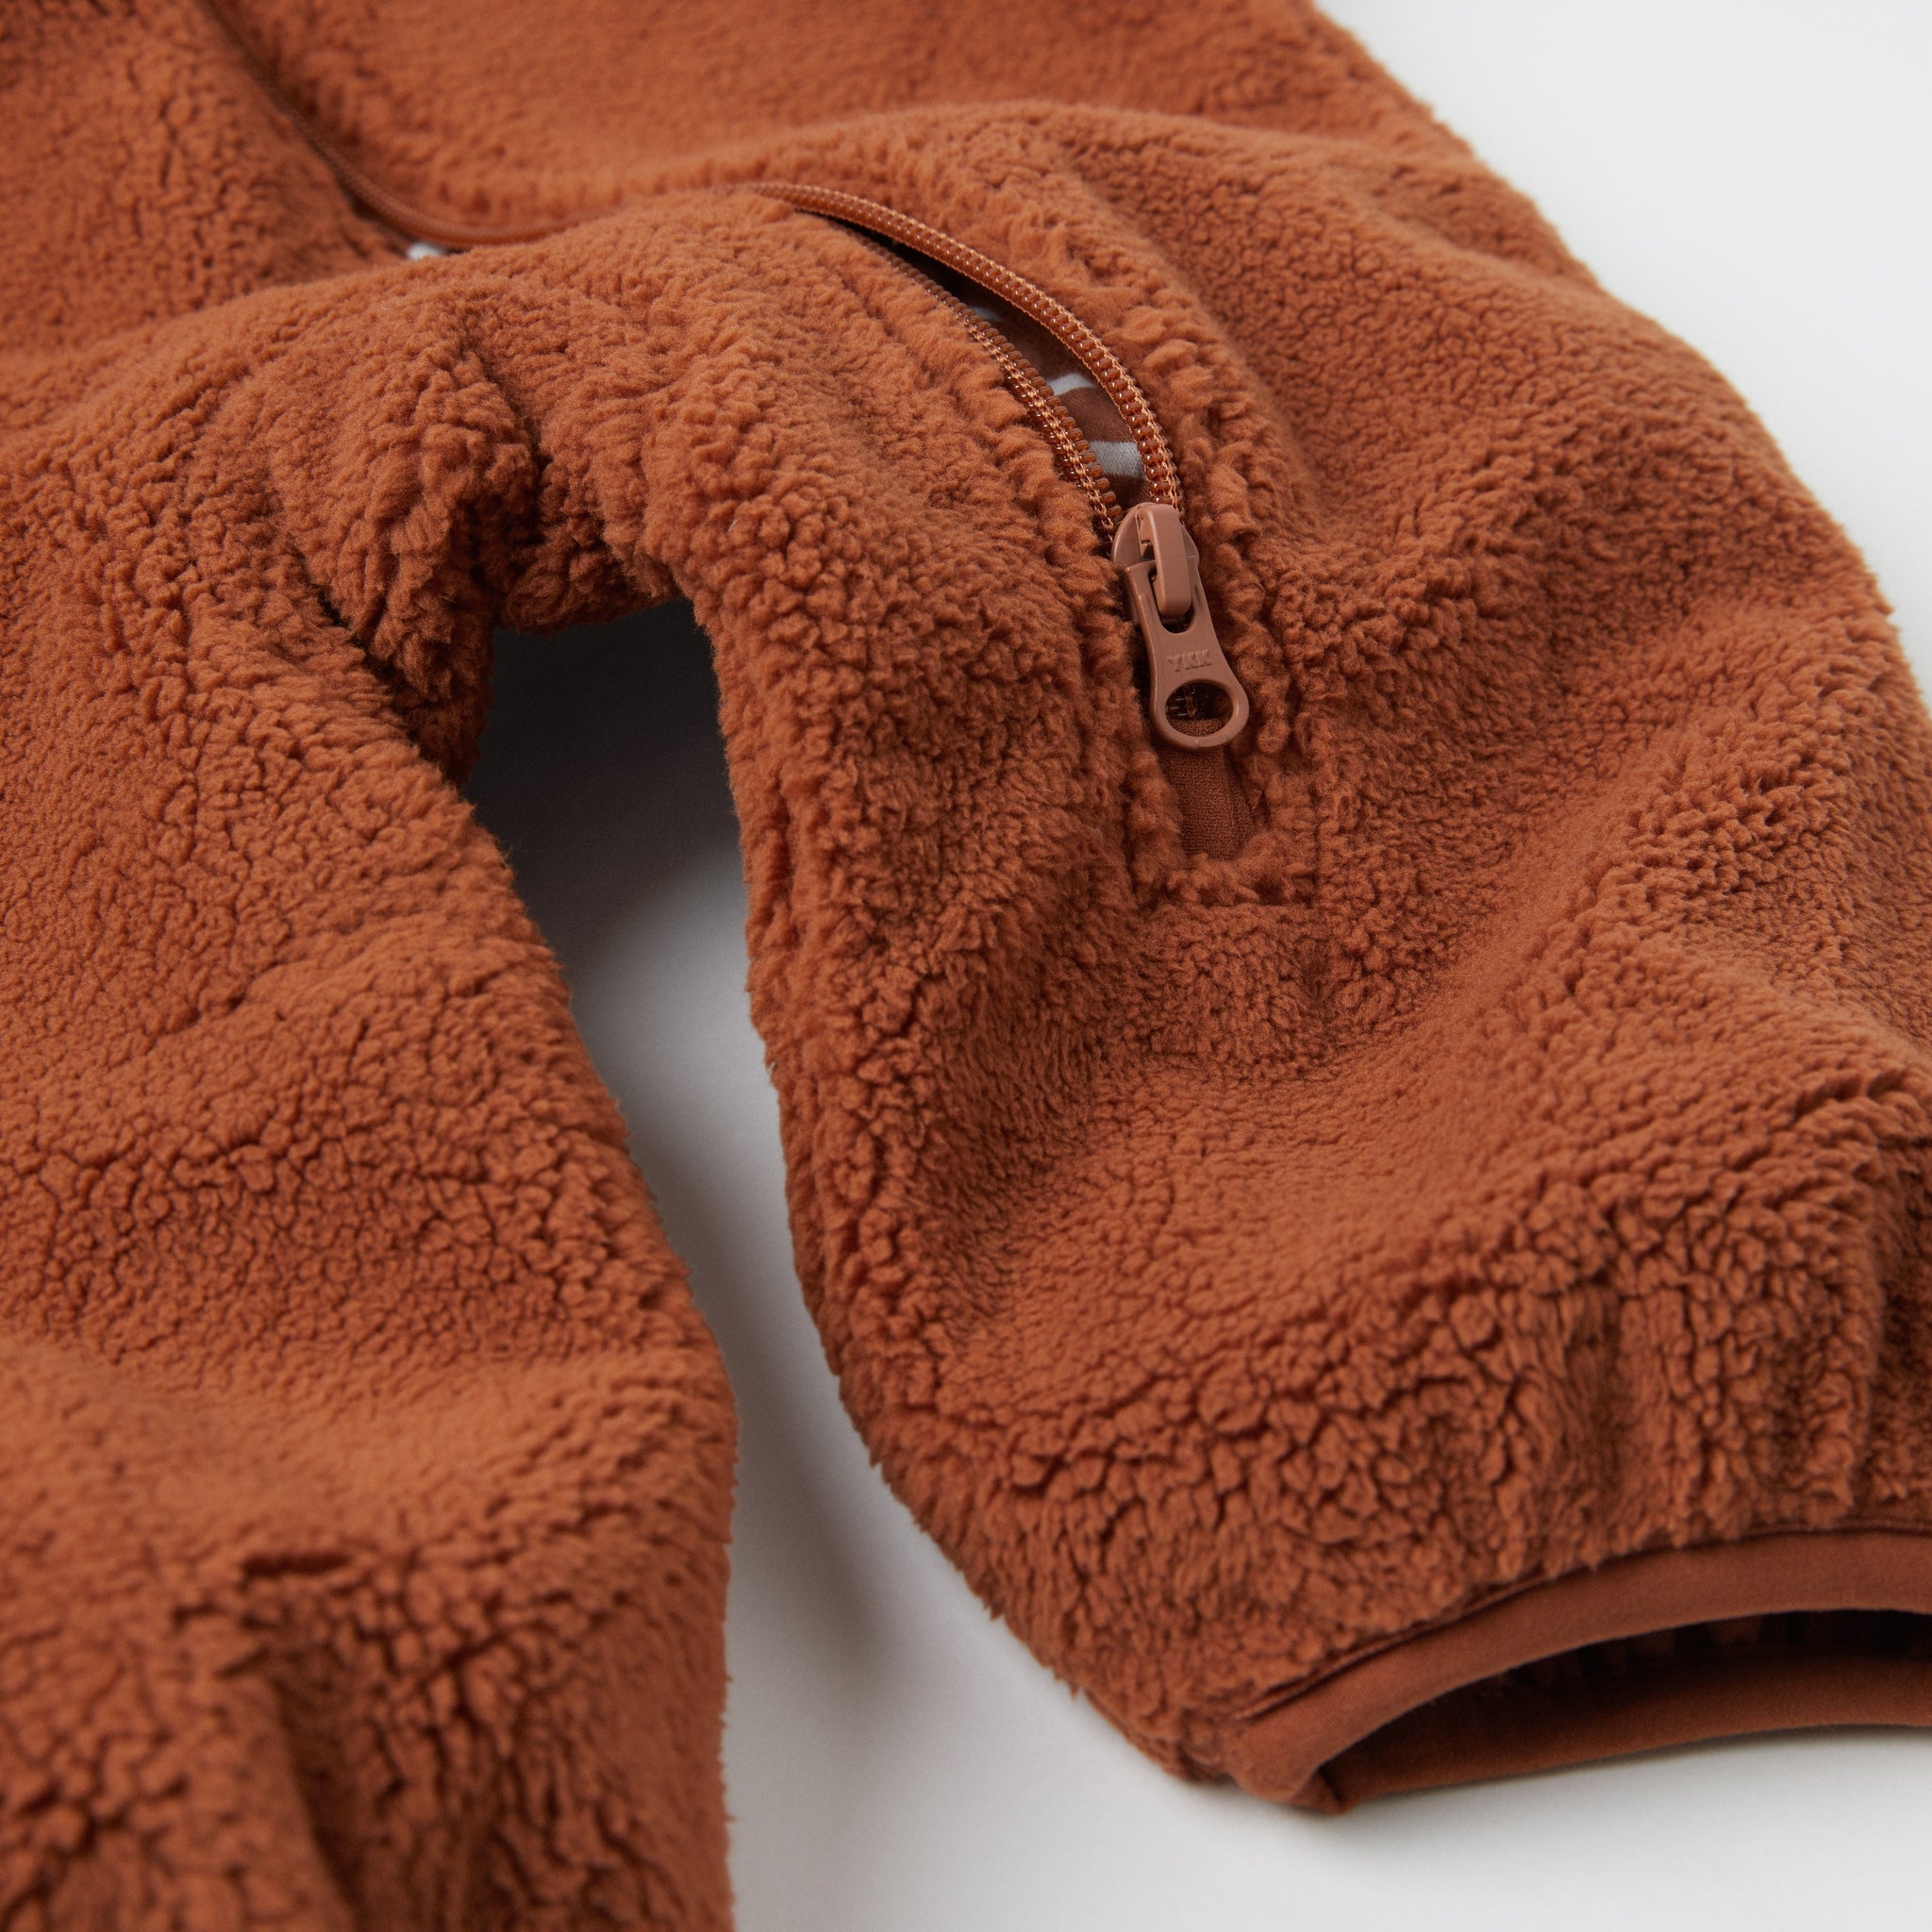 Fleece Teddy Bear Baby Pramsuit from the Polarn O. Pyret kidswear collection. Ethically produced outerwear.